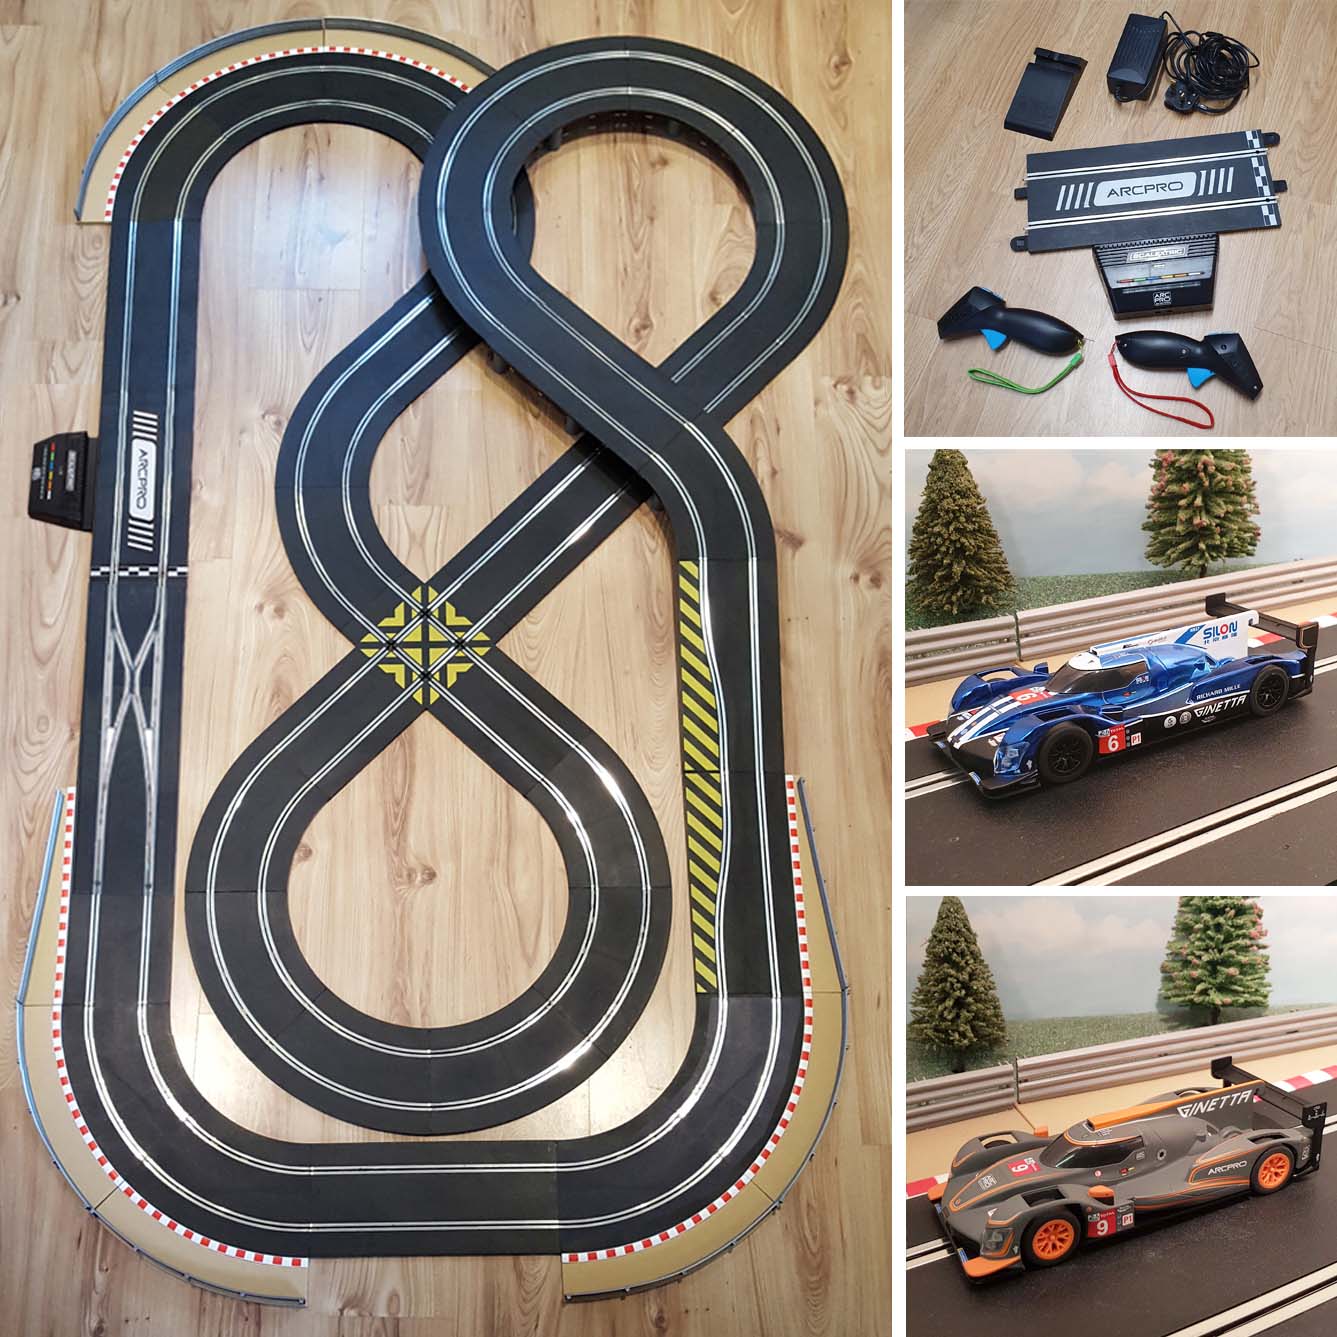 Scalextric 1:32 Figure-Of-Eight Layout Set ARC Pro + Le Mans Ginetta Cars